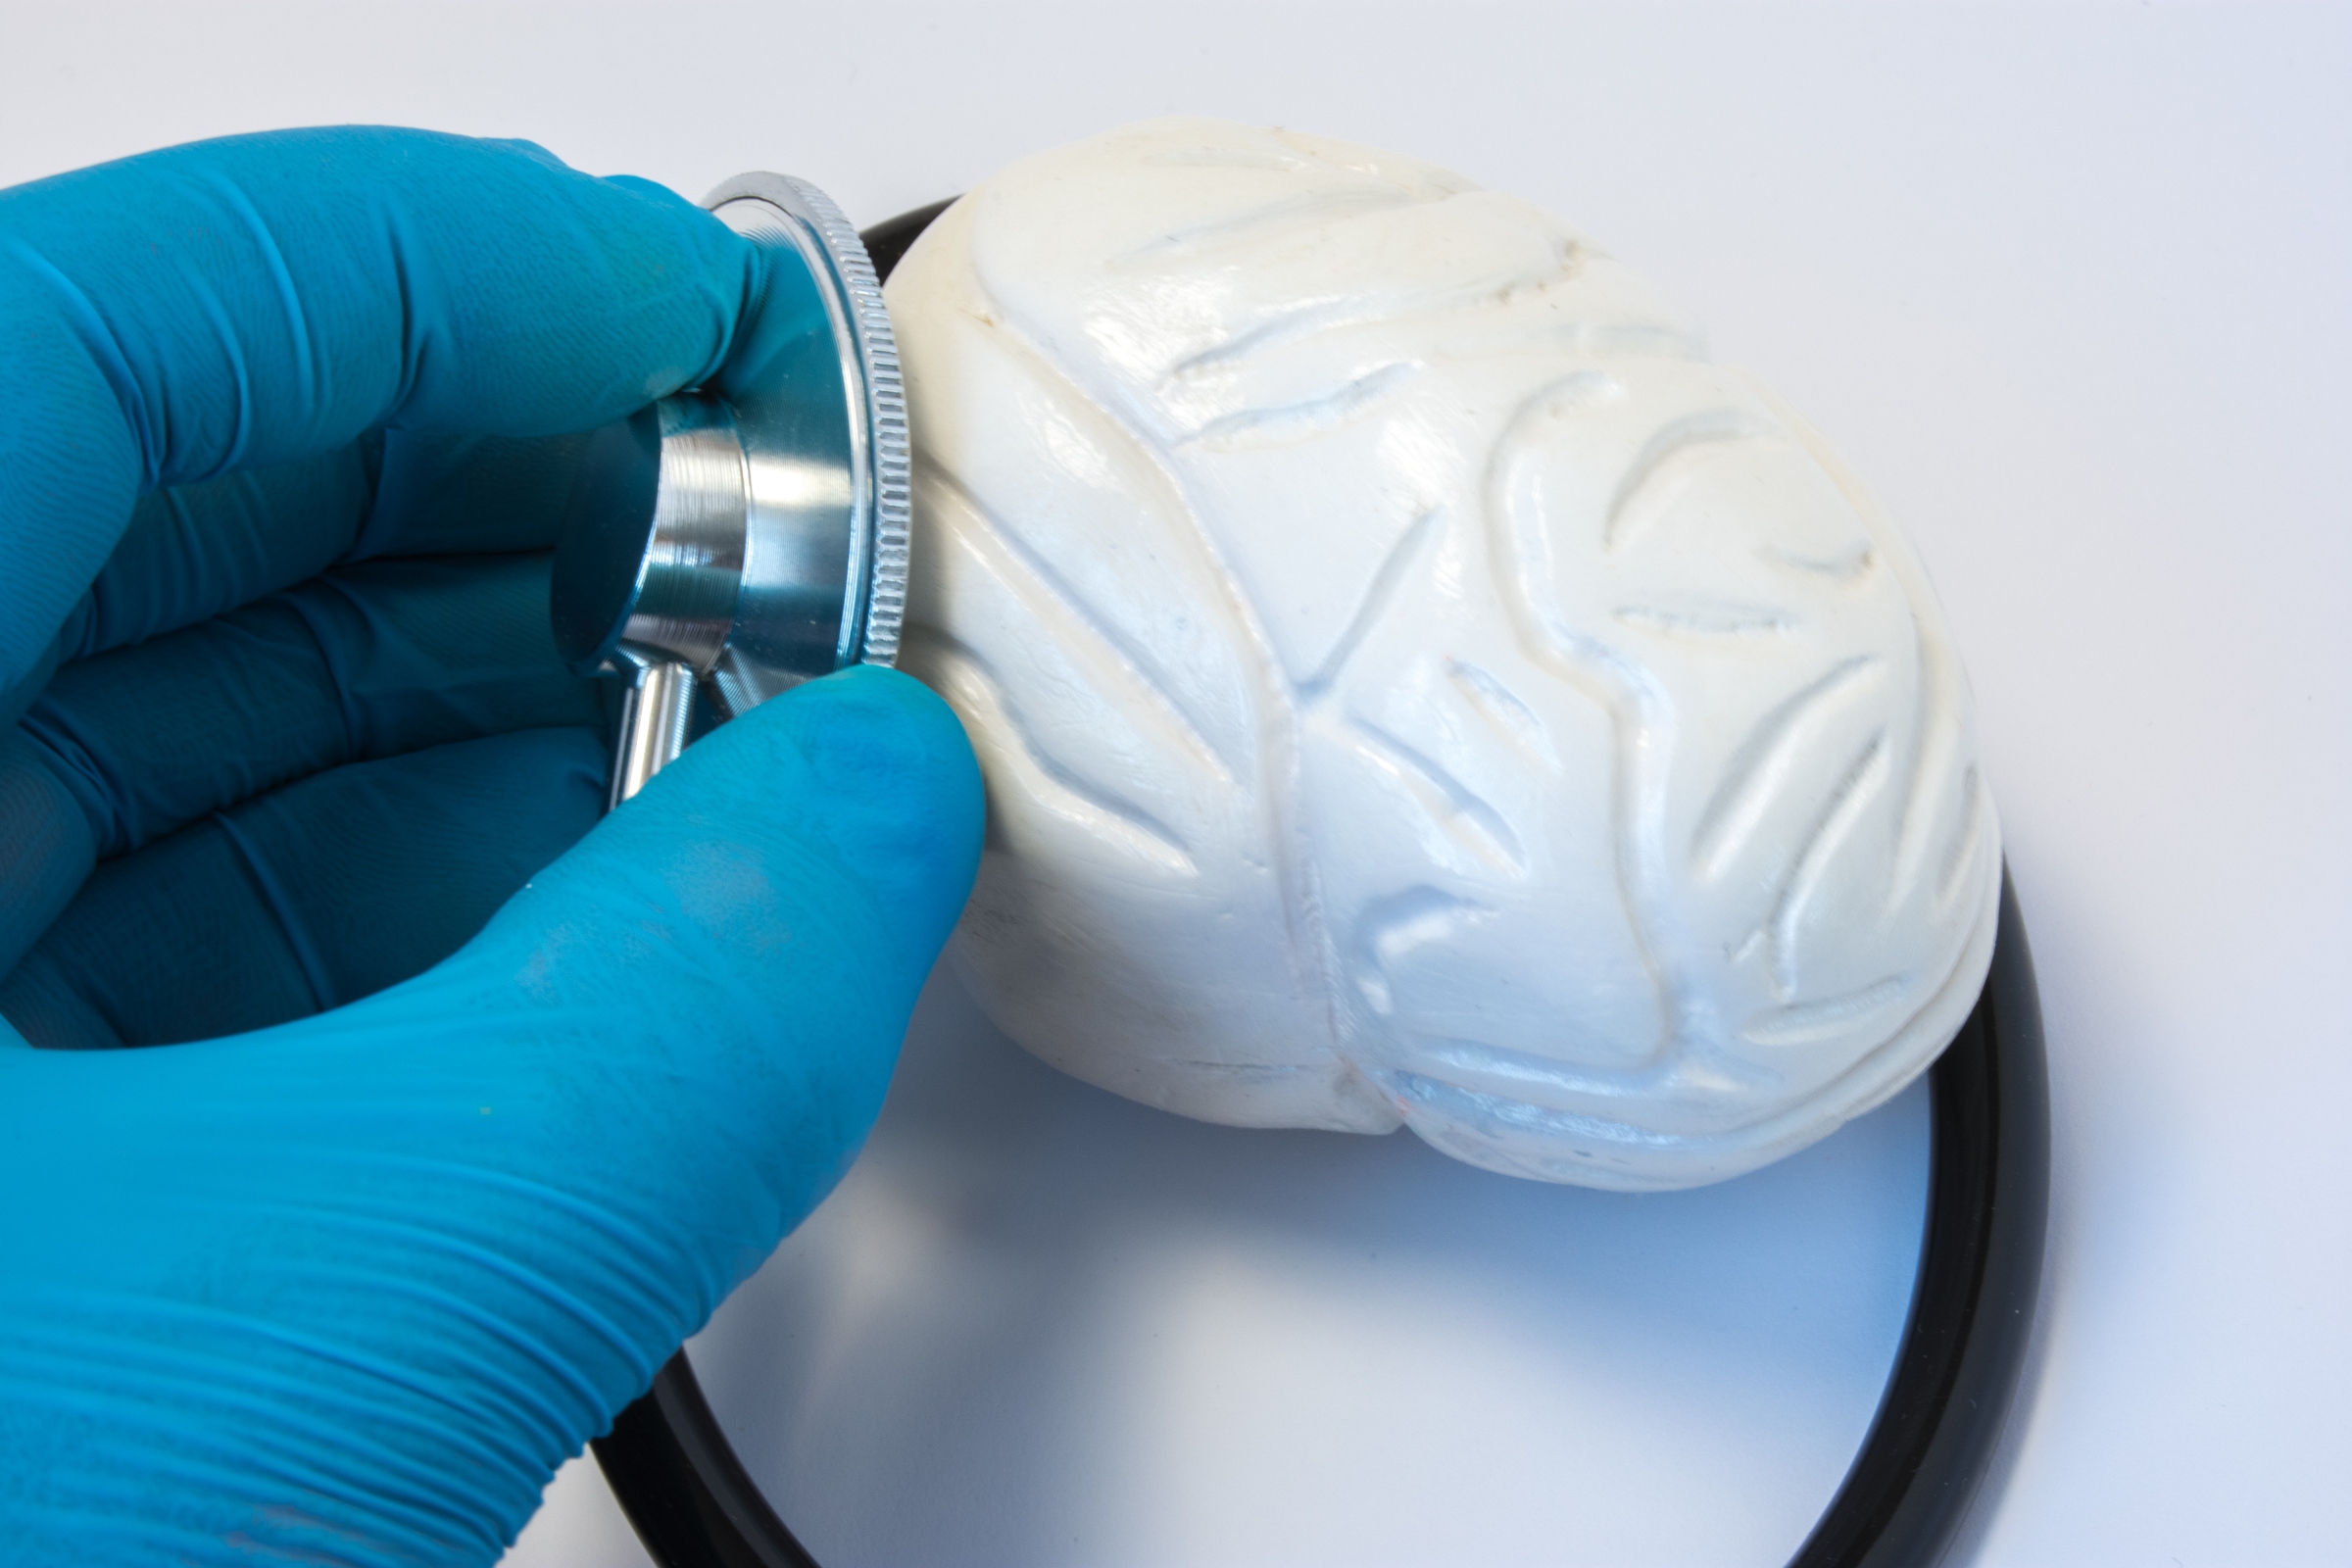 The doctor examines the human brain with a stethoscope photo